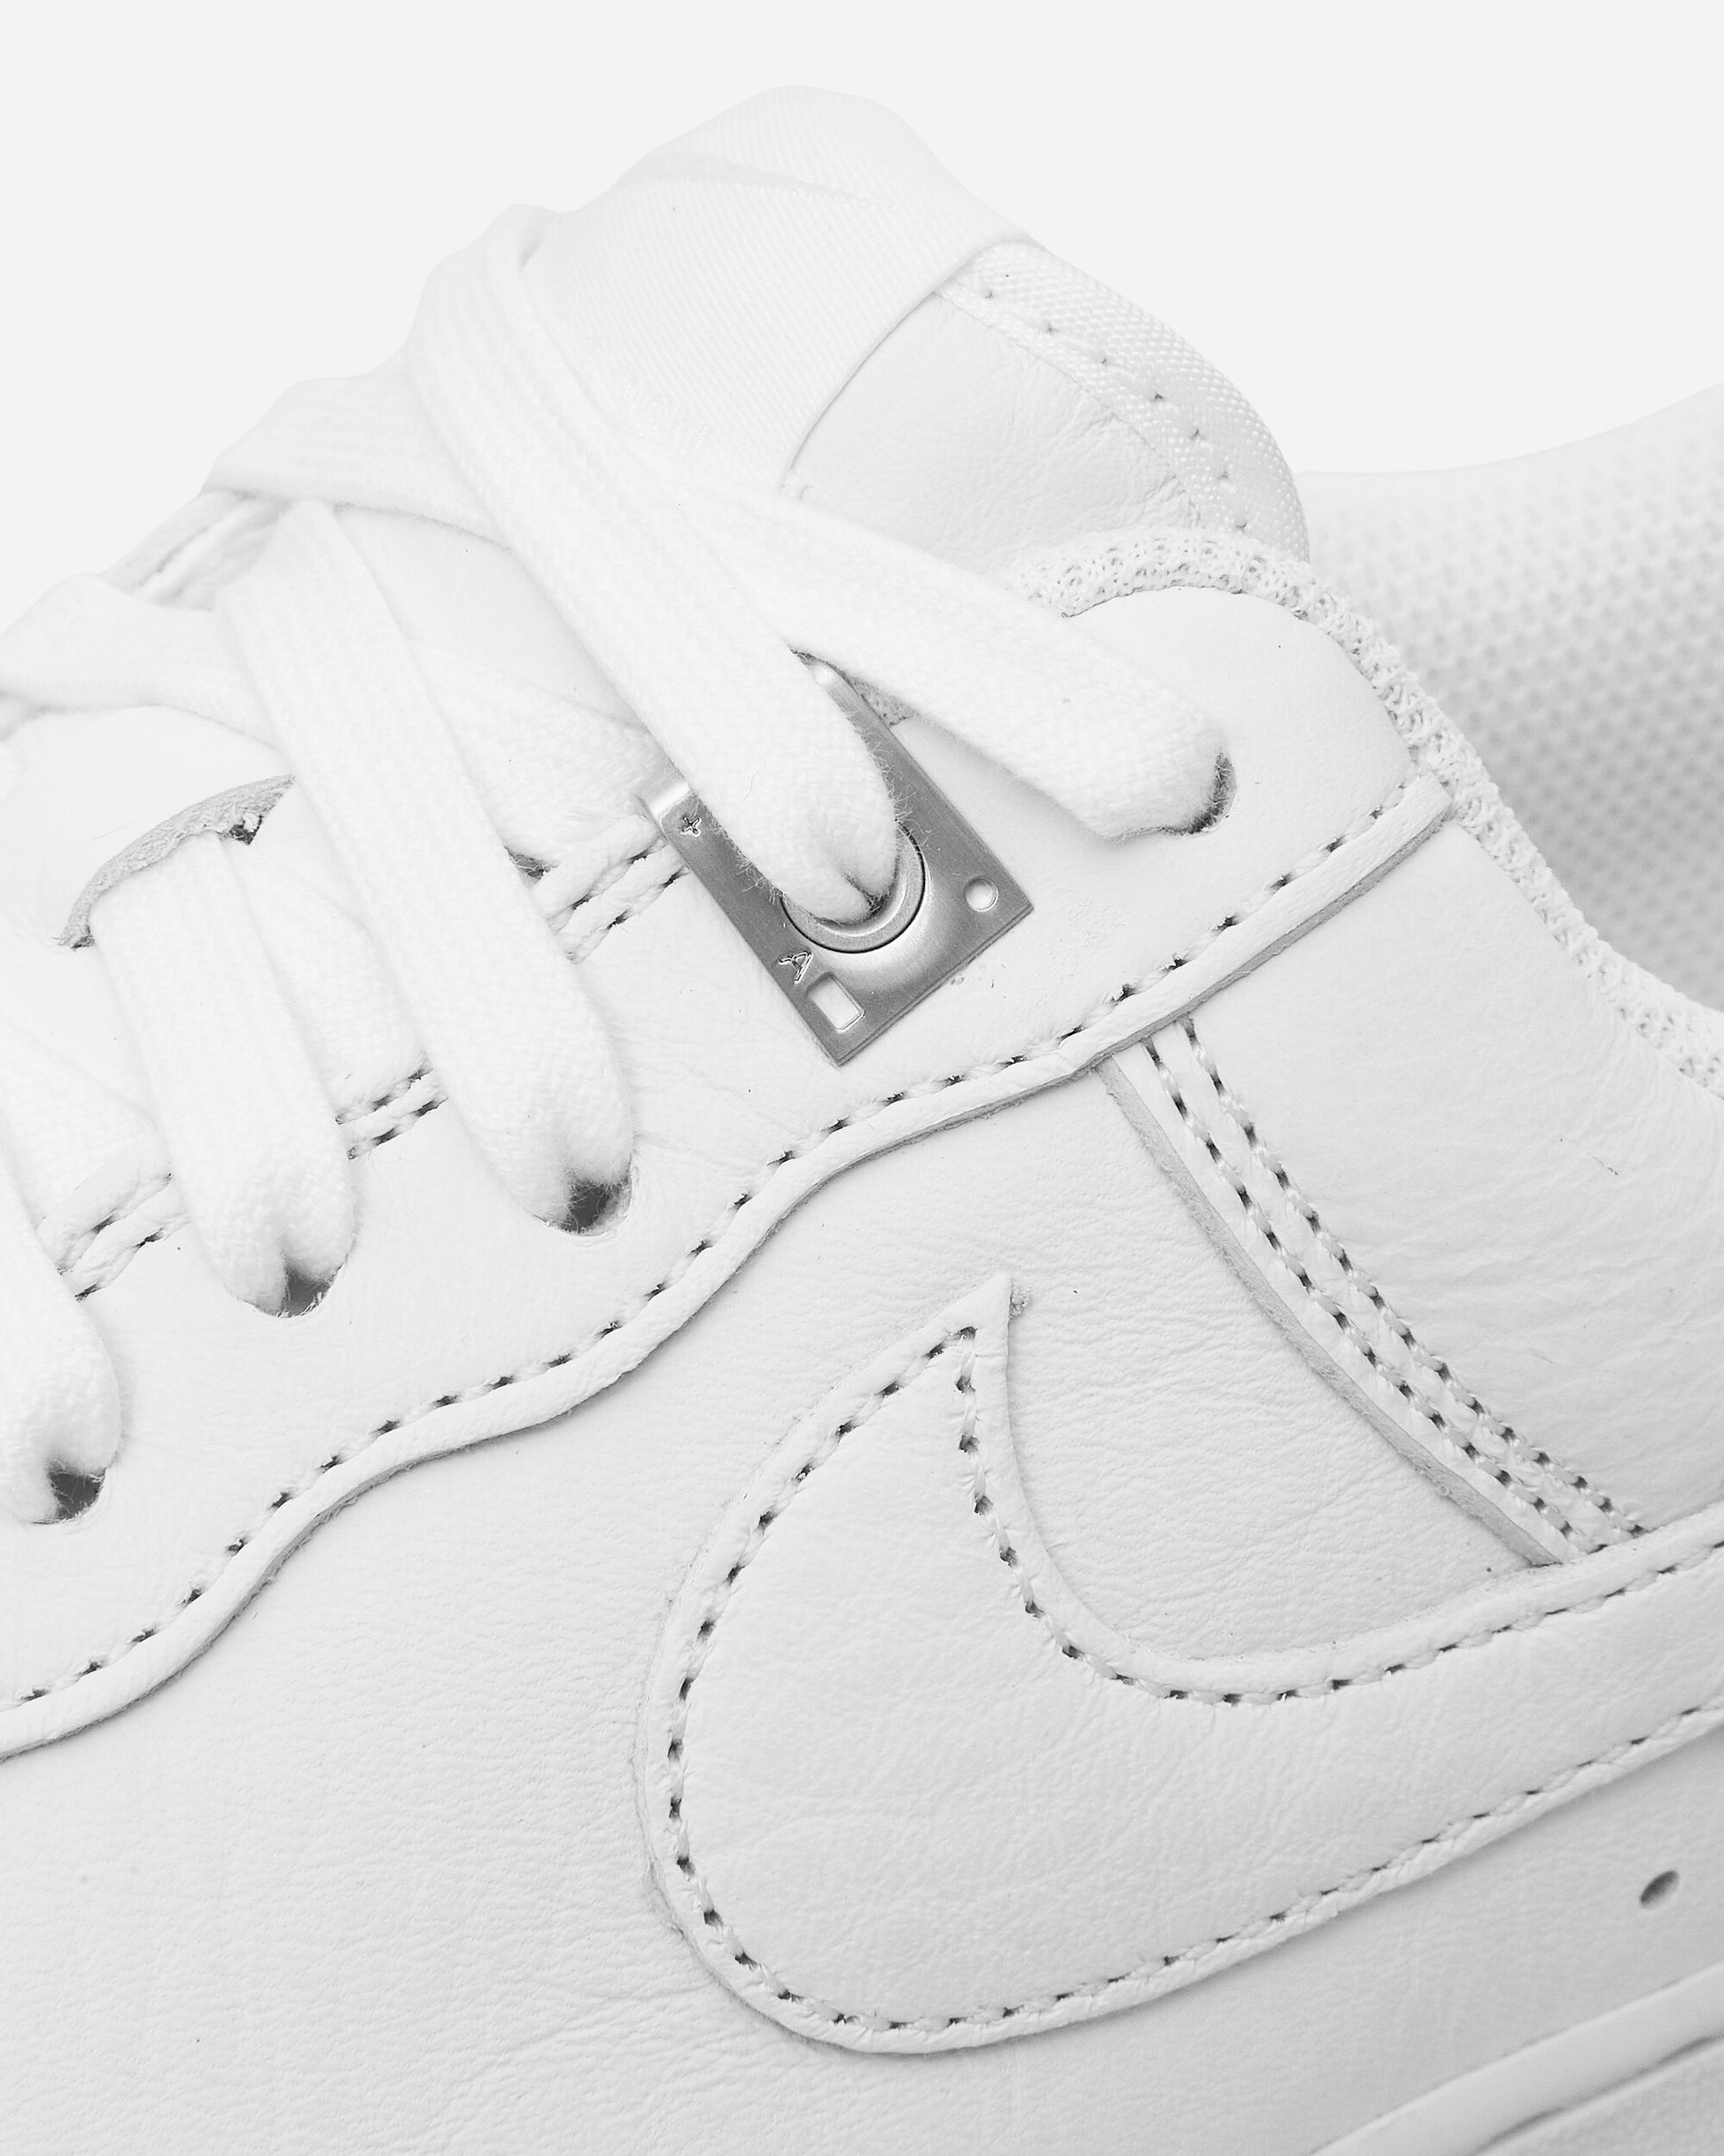 Nike Air Force 1 Sp White/White Sneakers Low FJ4908-100